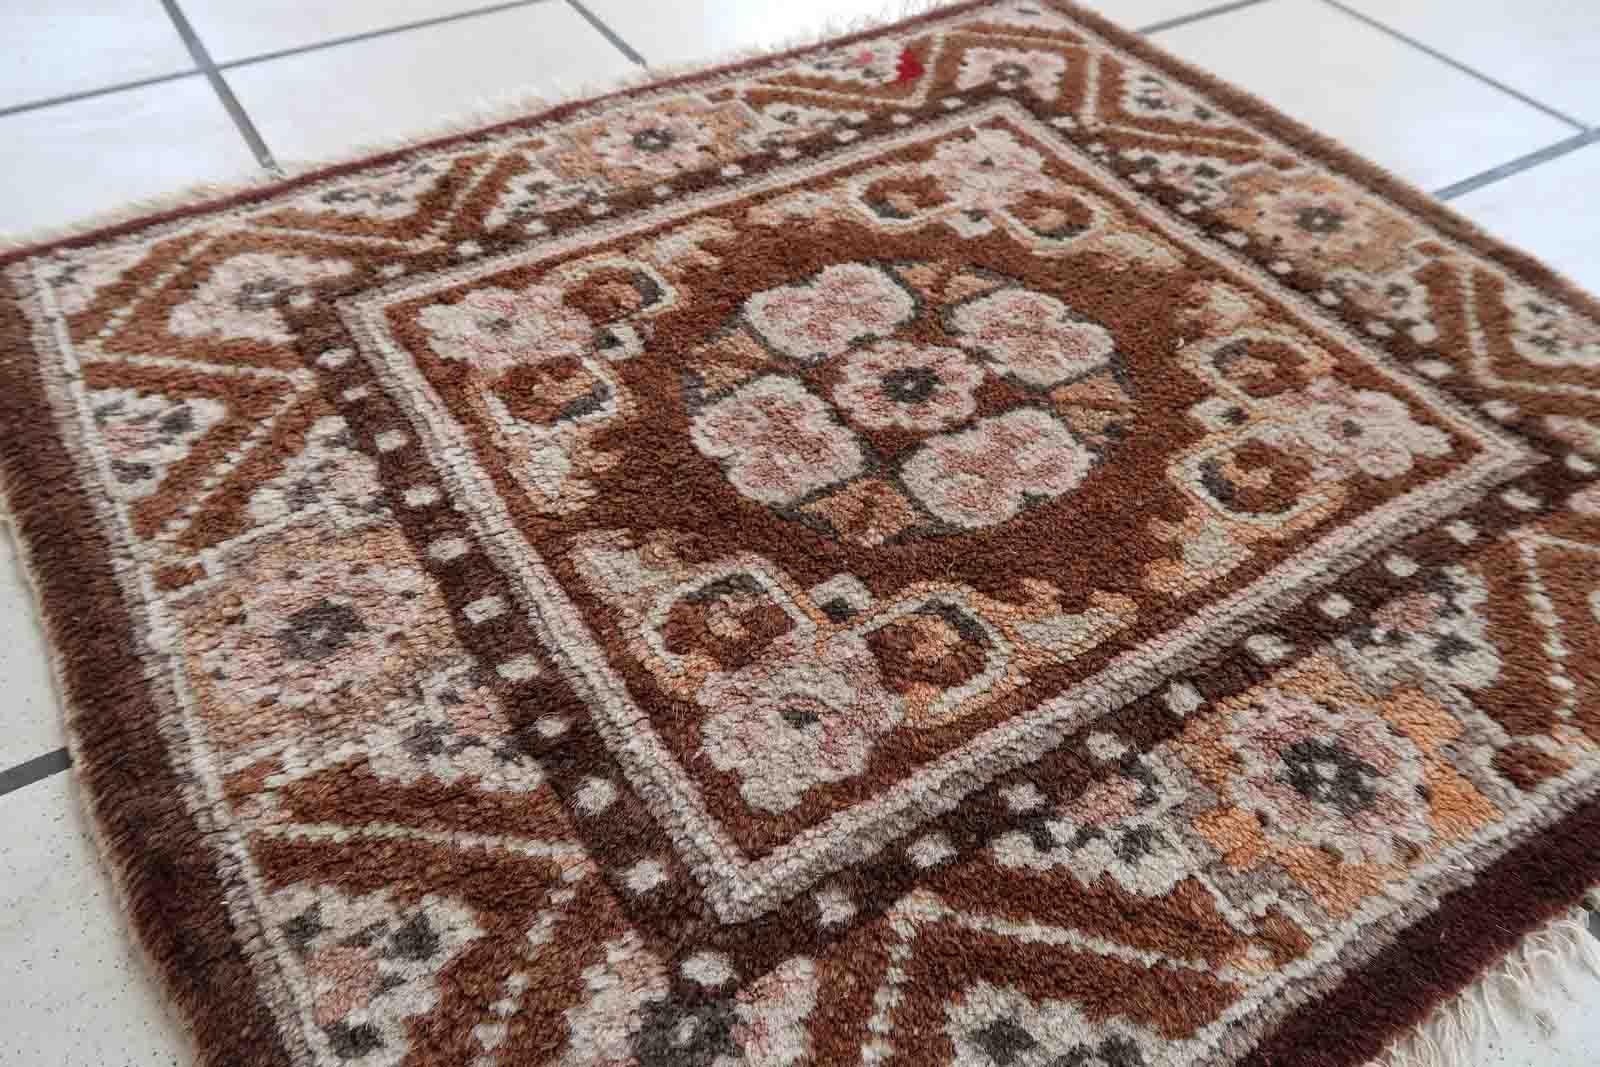 Handmade vintage Mongolian collectible mat in brown shade. The rug is from the middle of 20th century in original good condition.

-condition: original good,

-circa: 1950s,

-size: 1.7' x 1.9' (52cm x 60cm),

-material: wool,

-country of origin: